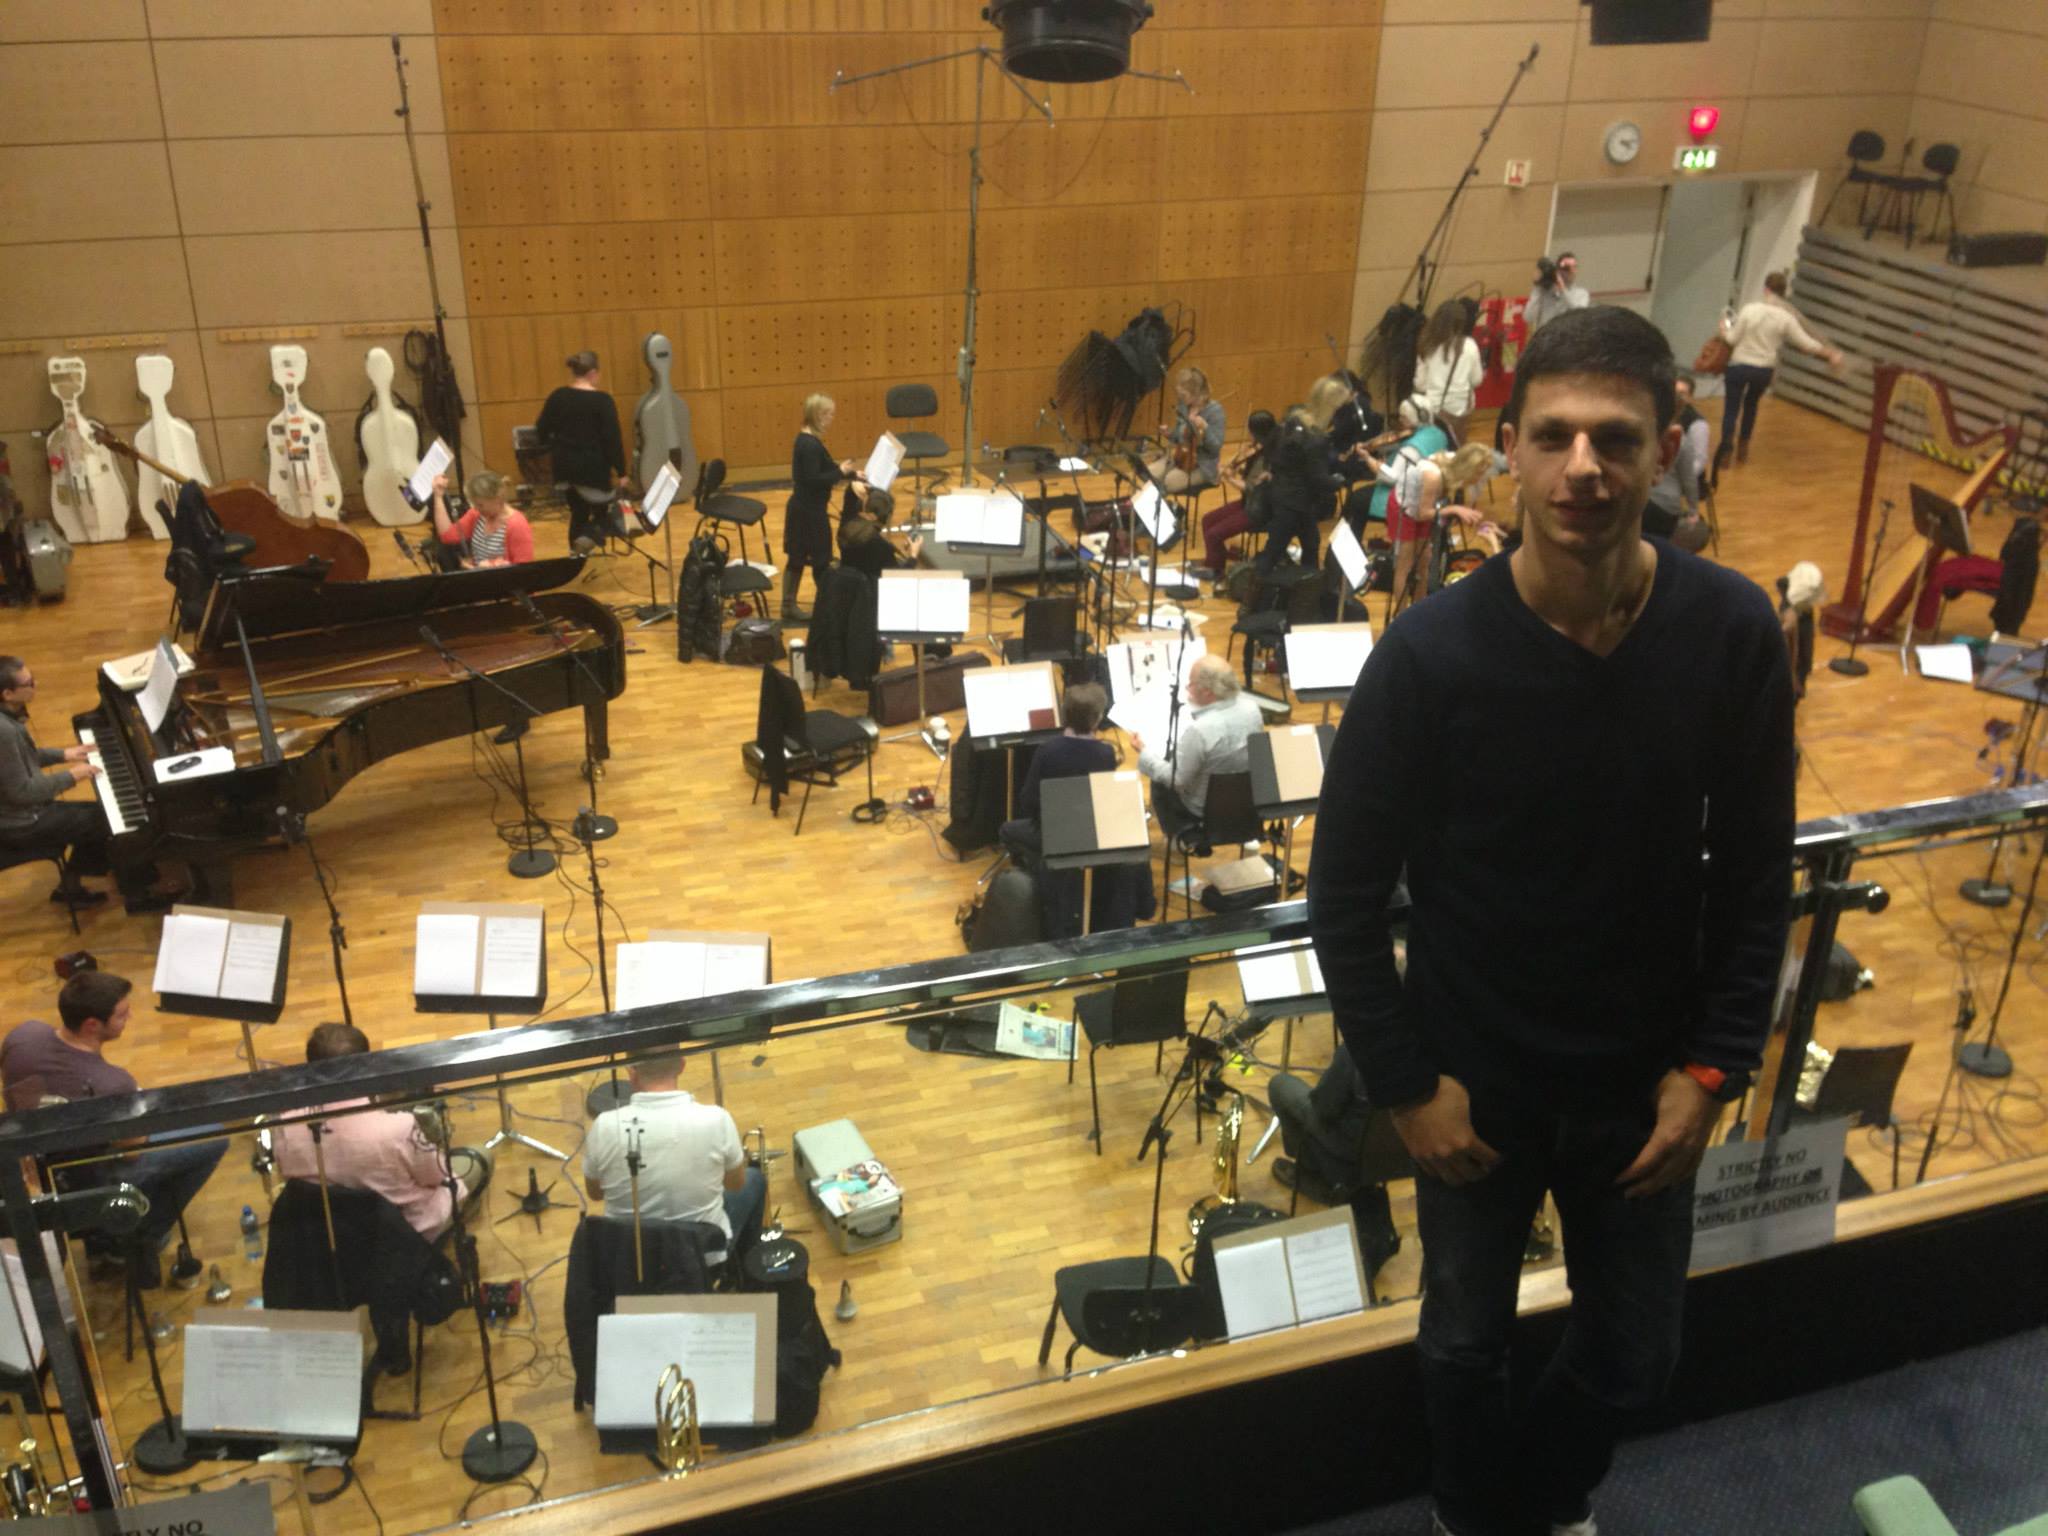 Stefan French, 'An Ode To Love' Scoring Session, RTE Studio 1